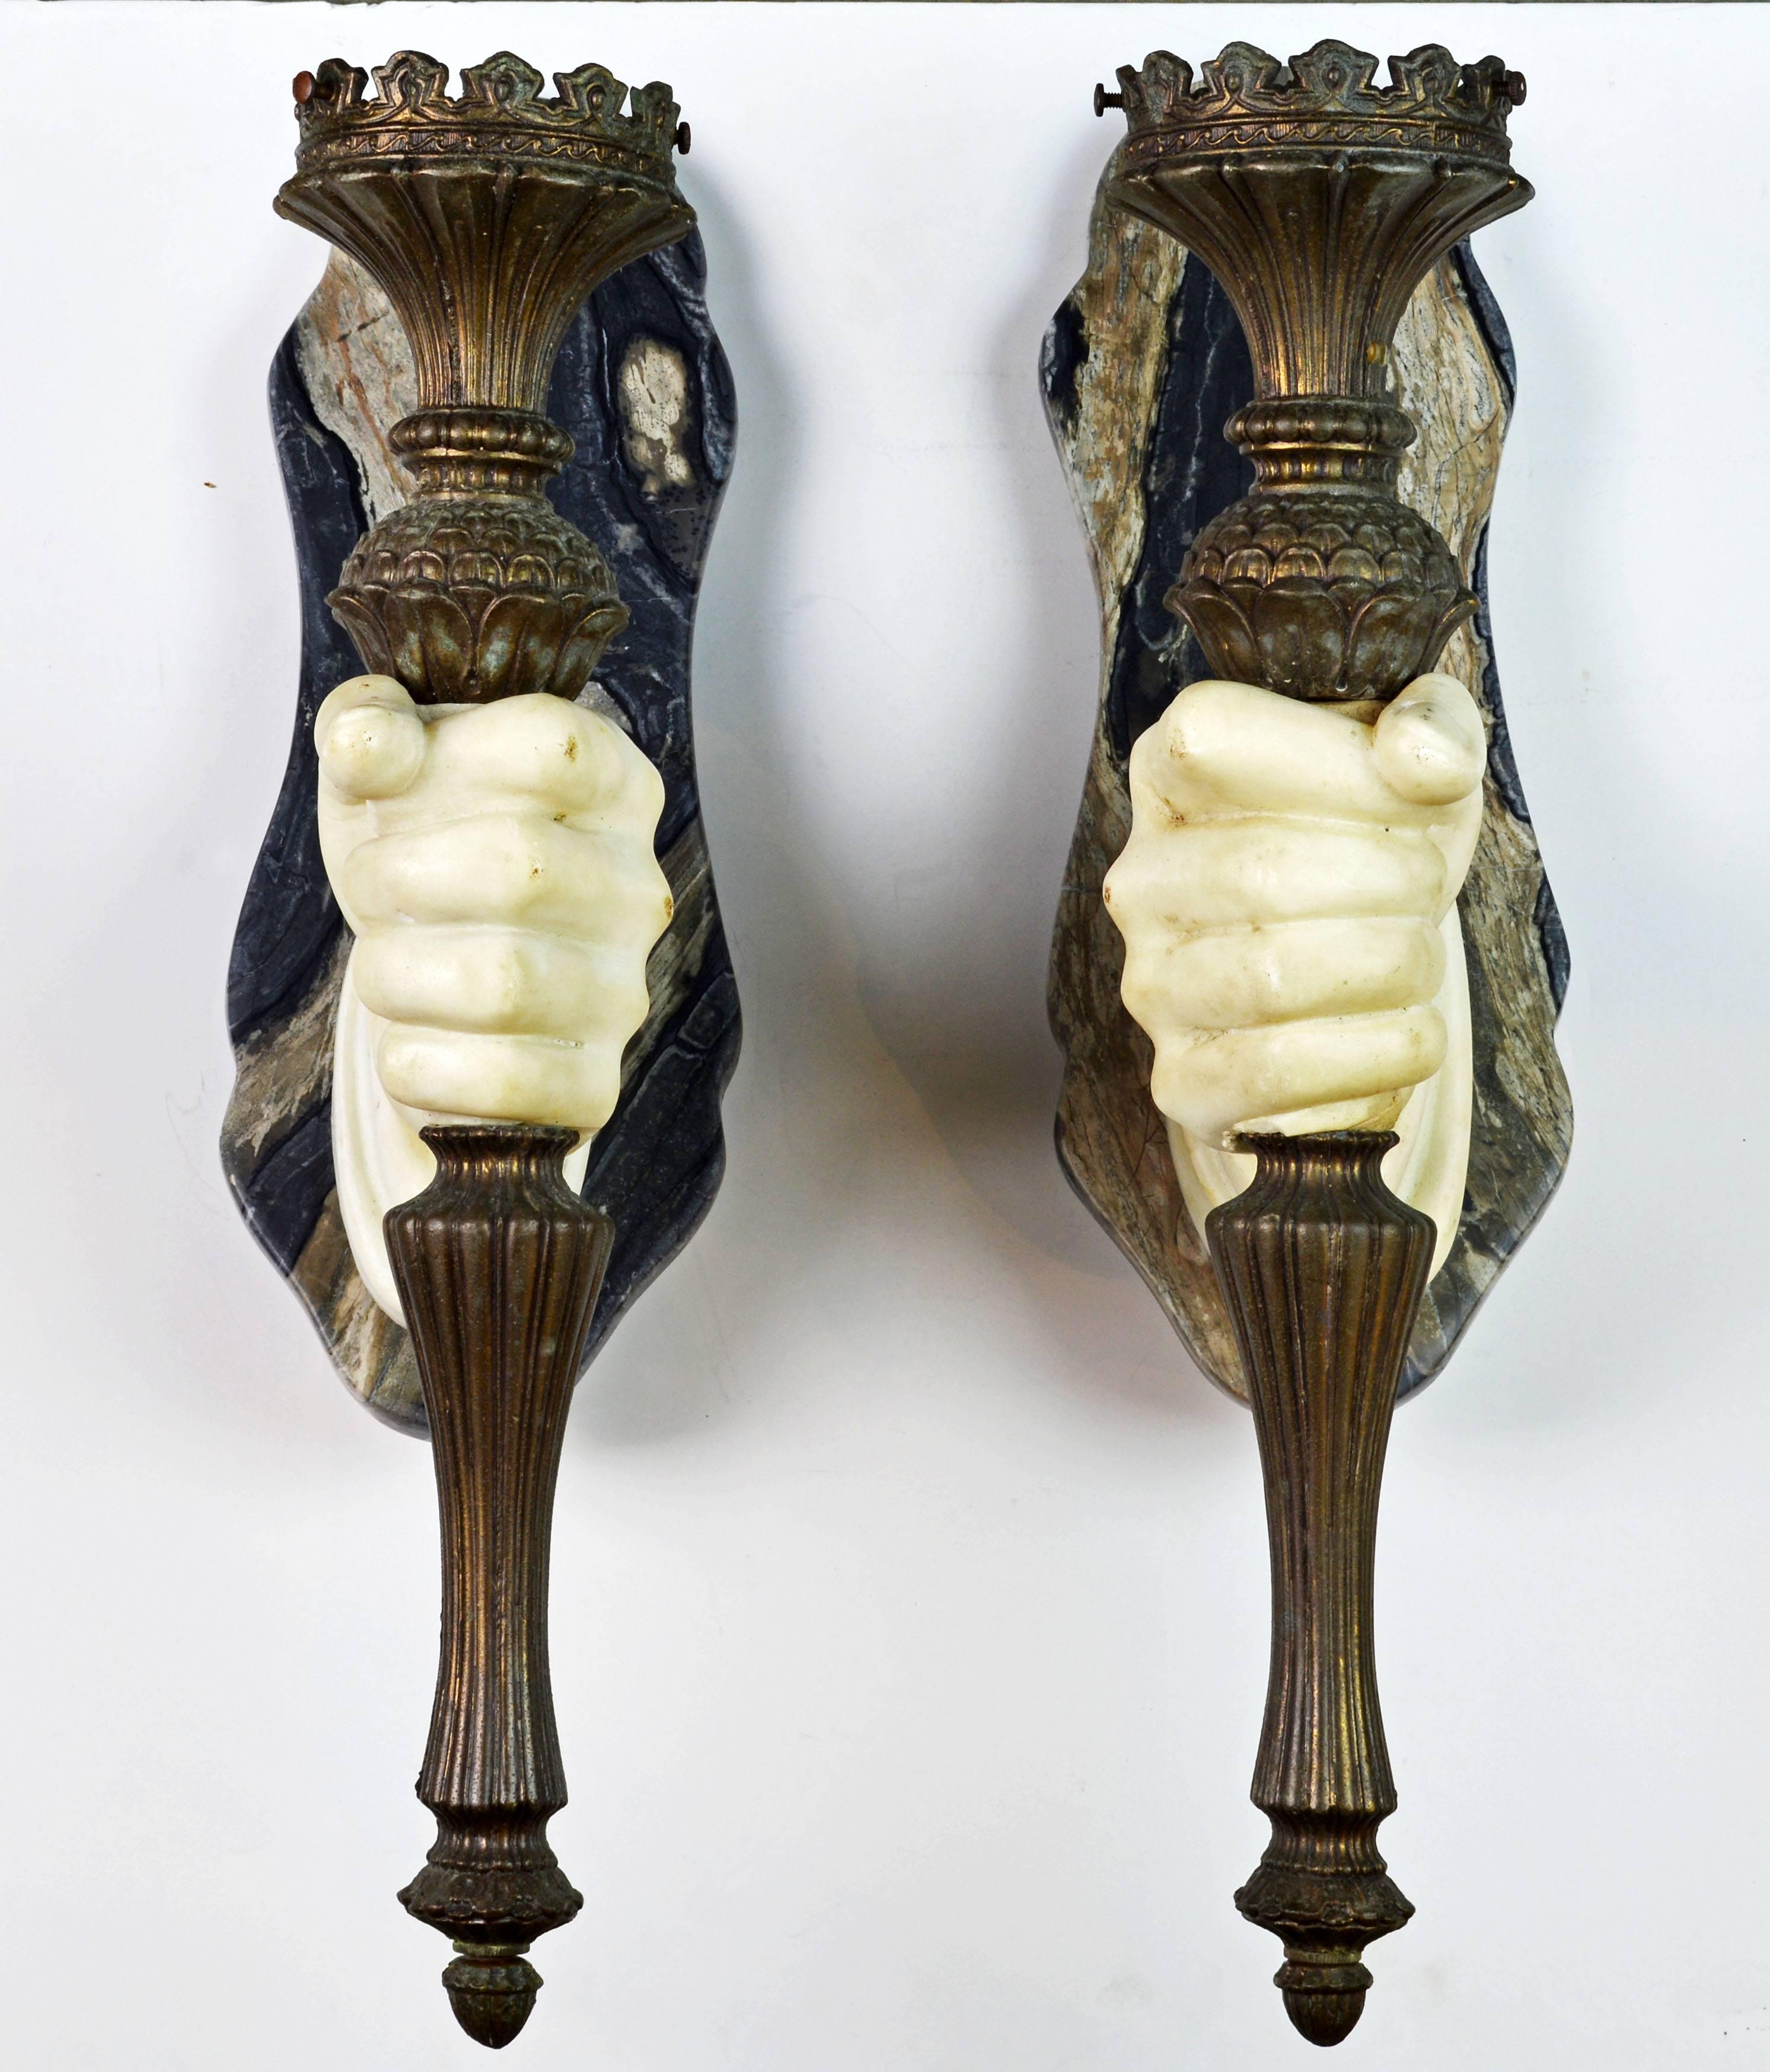 Neoclassical Pair of Rare 19th Ct. French Marble Hand and patinated metal Torch Wall Sconces